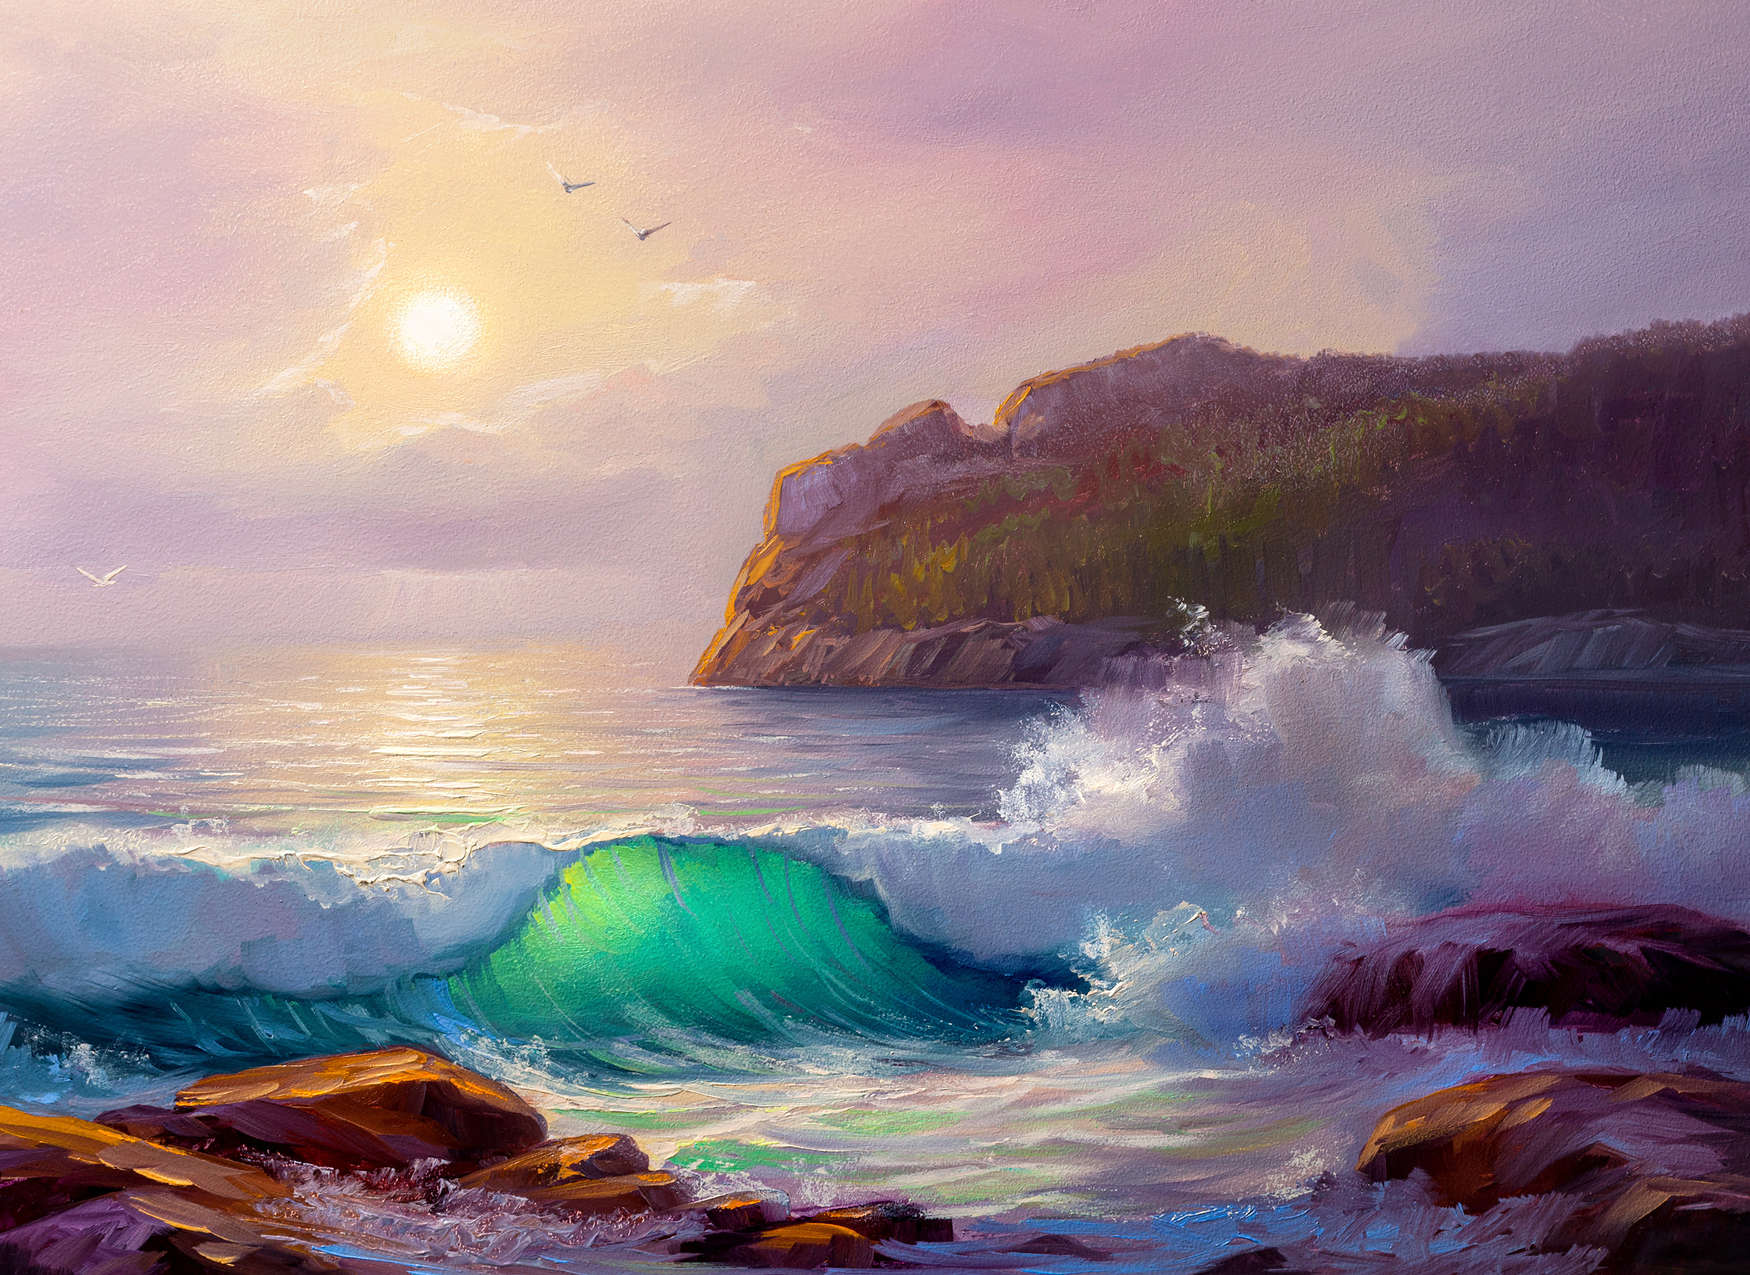             Photo wallpaper Painting of a Coast at Sunrise - Blue, Purple, Brown
        